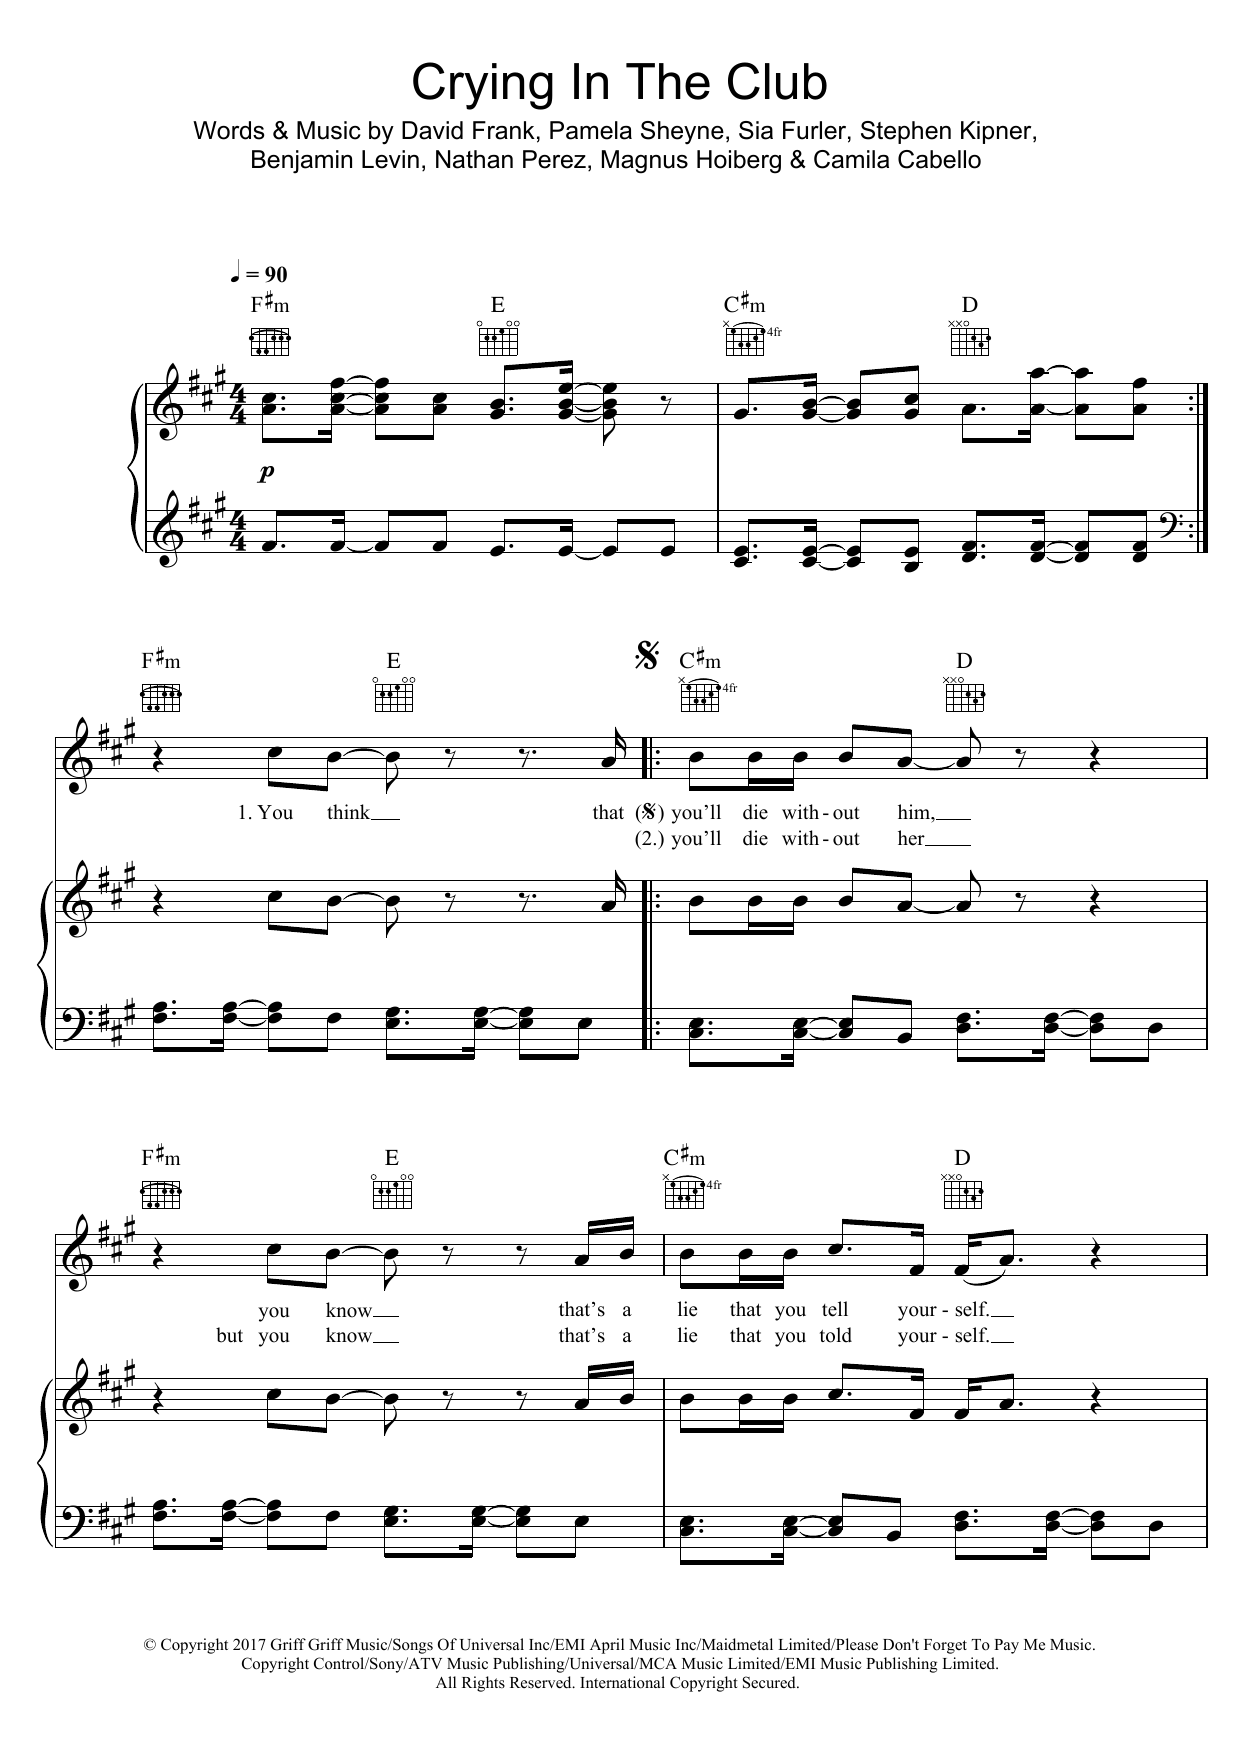 Download Camila Cabello Crying In The Club Sheet Music